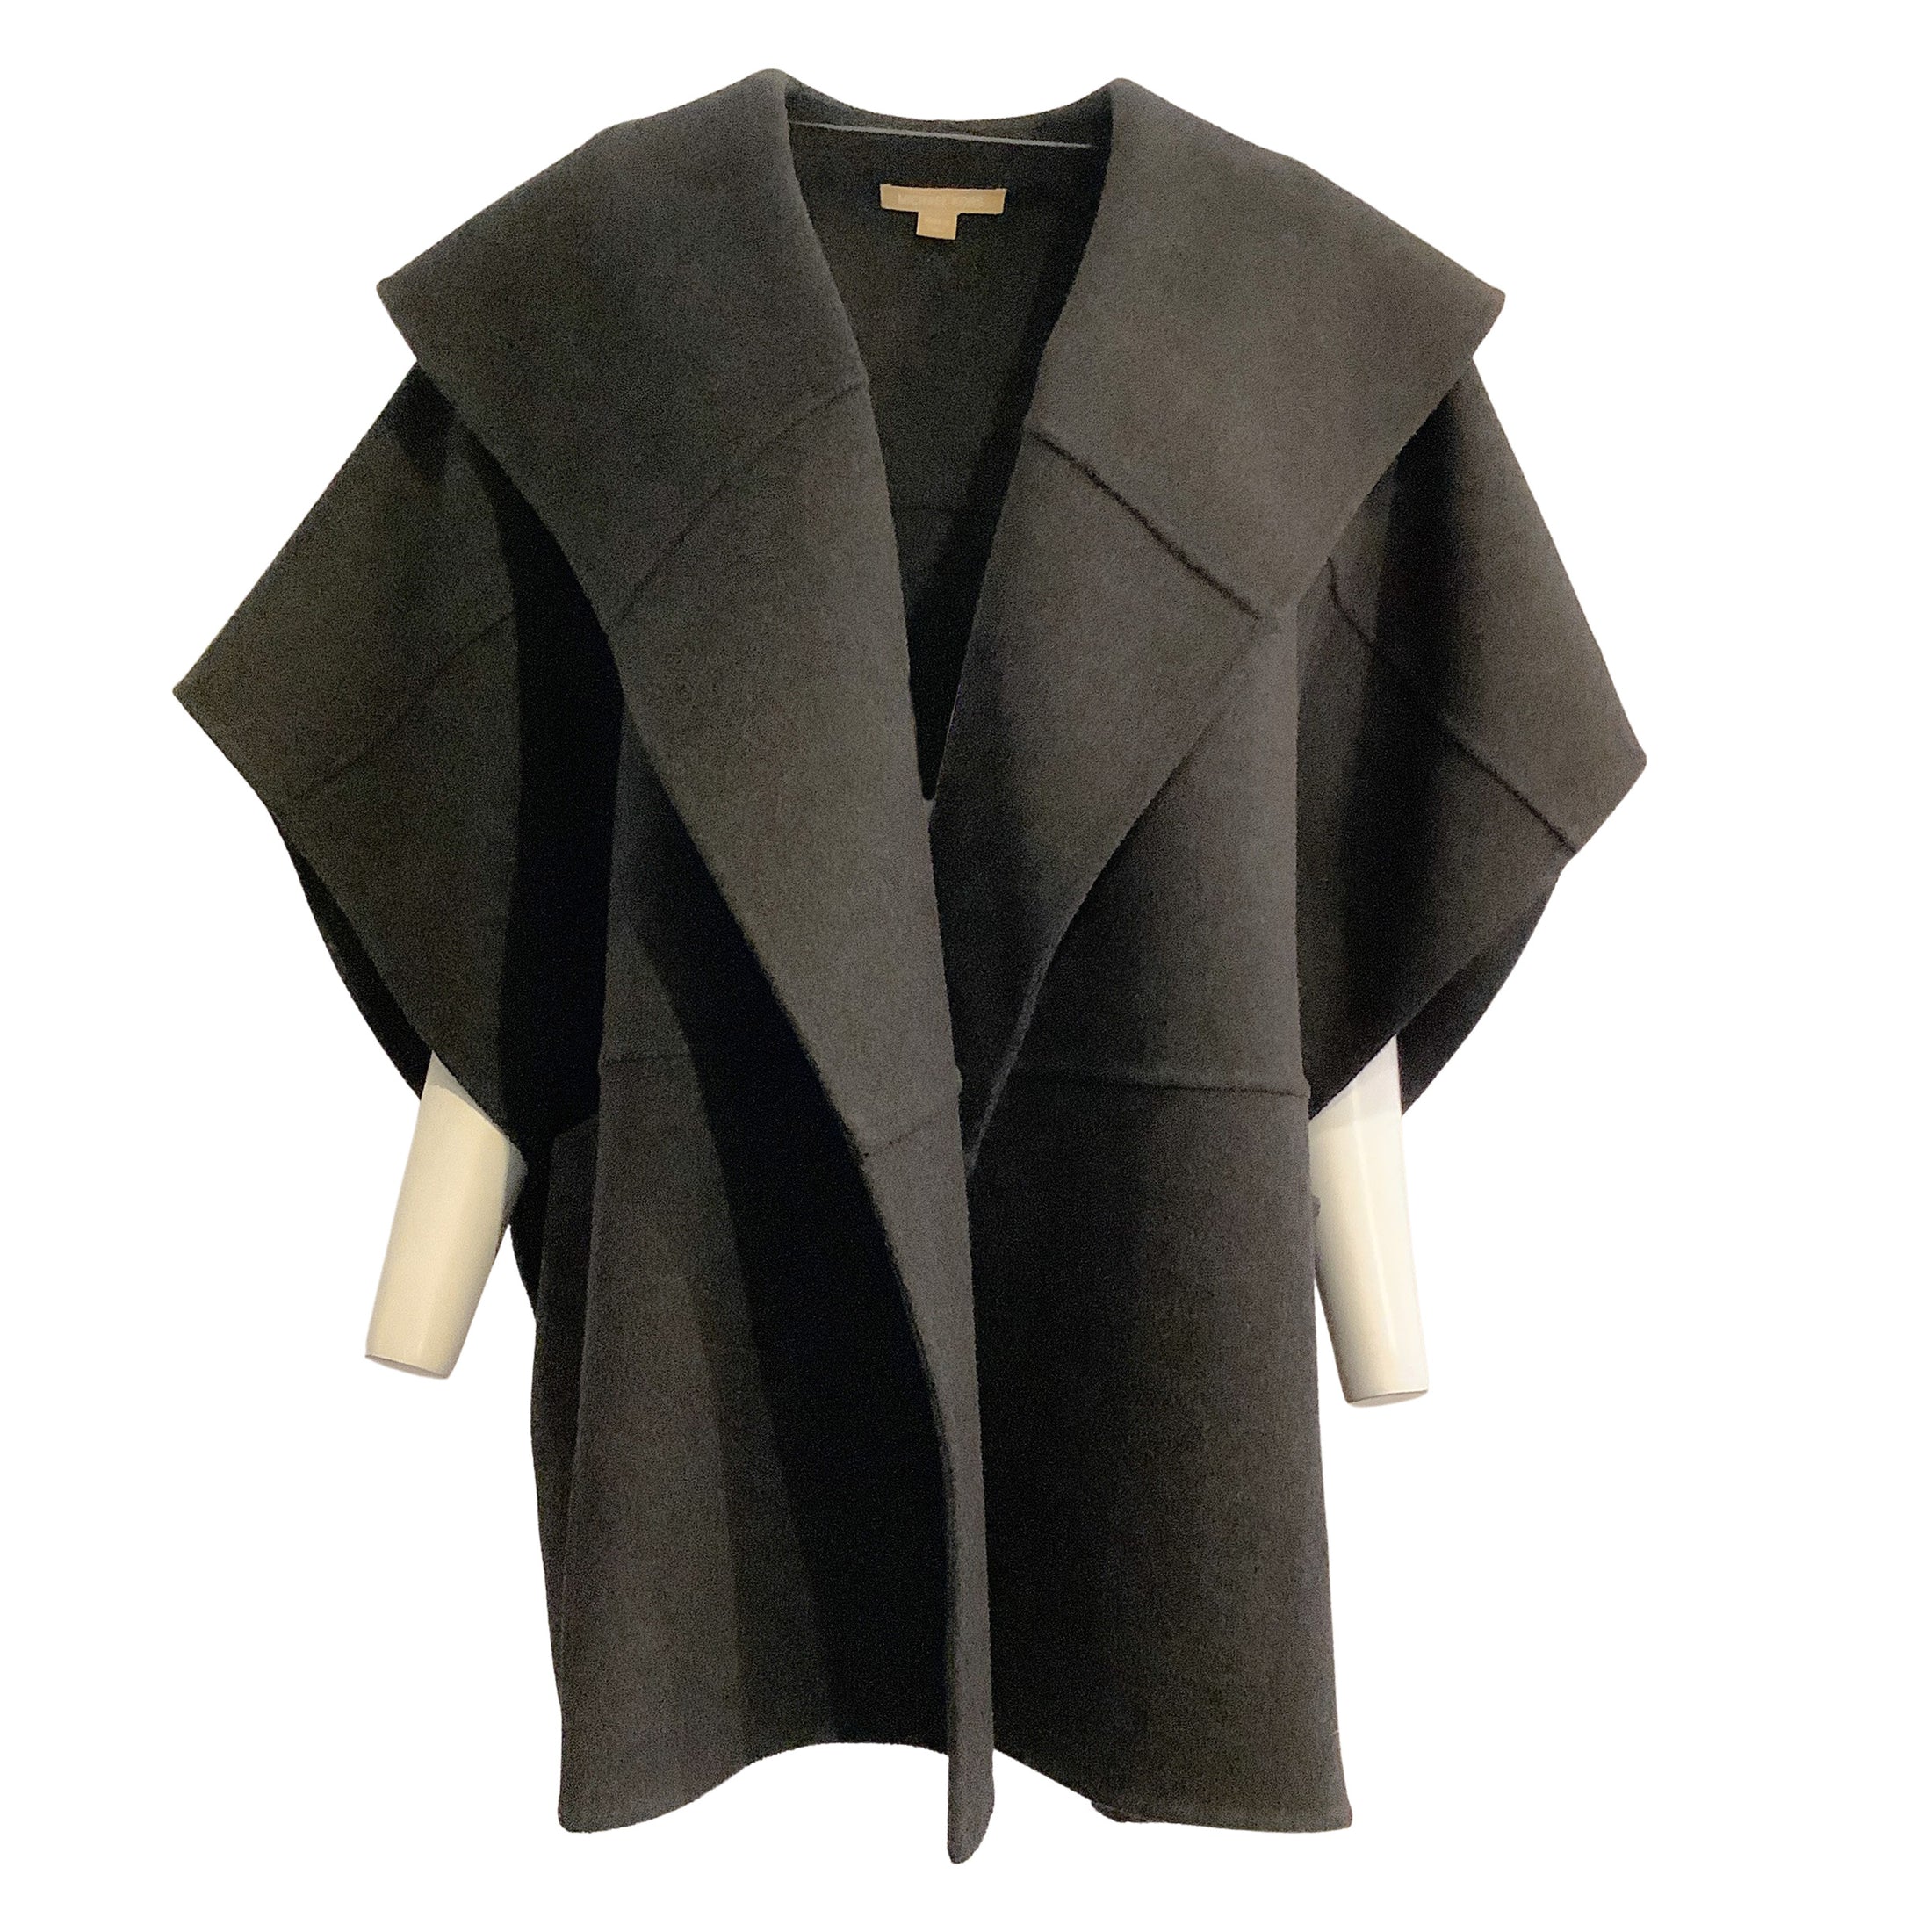 Michael Kors Collection Charcoal Wool Cape 